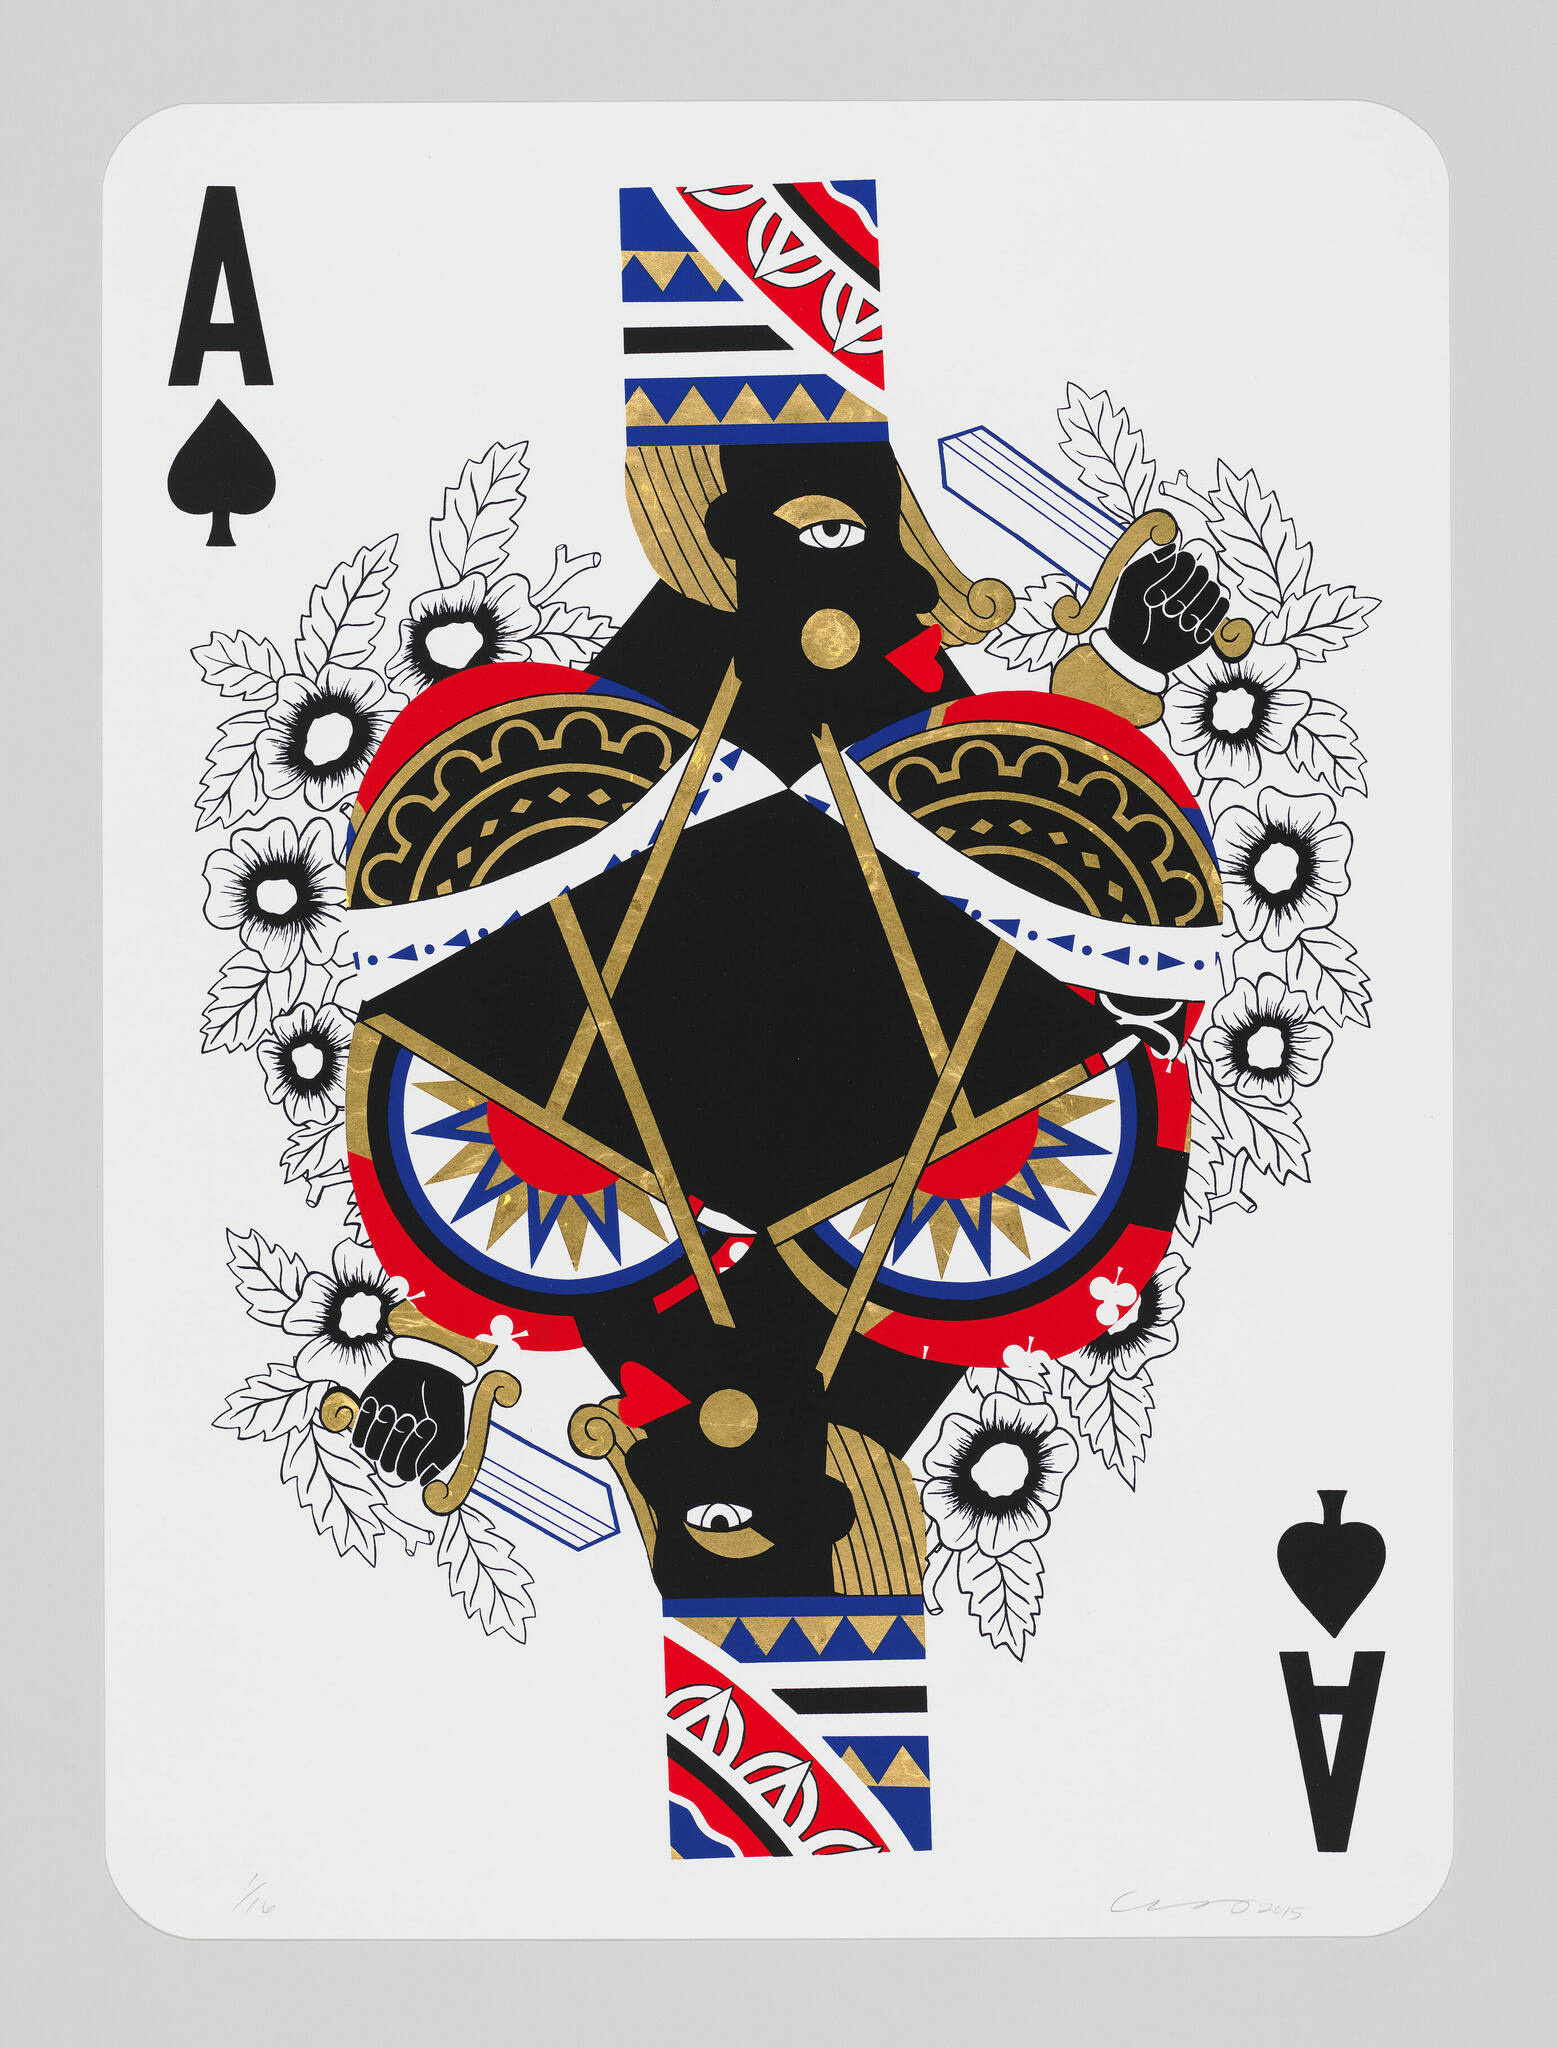 A playing card with a Black figure's mirrored bust at the center. The figure wears a printed cylindrical hat and holds a dagger.